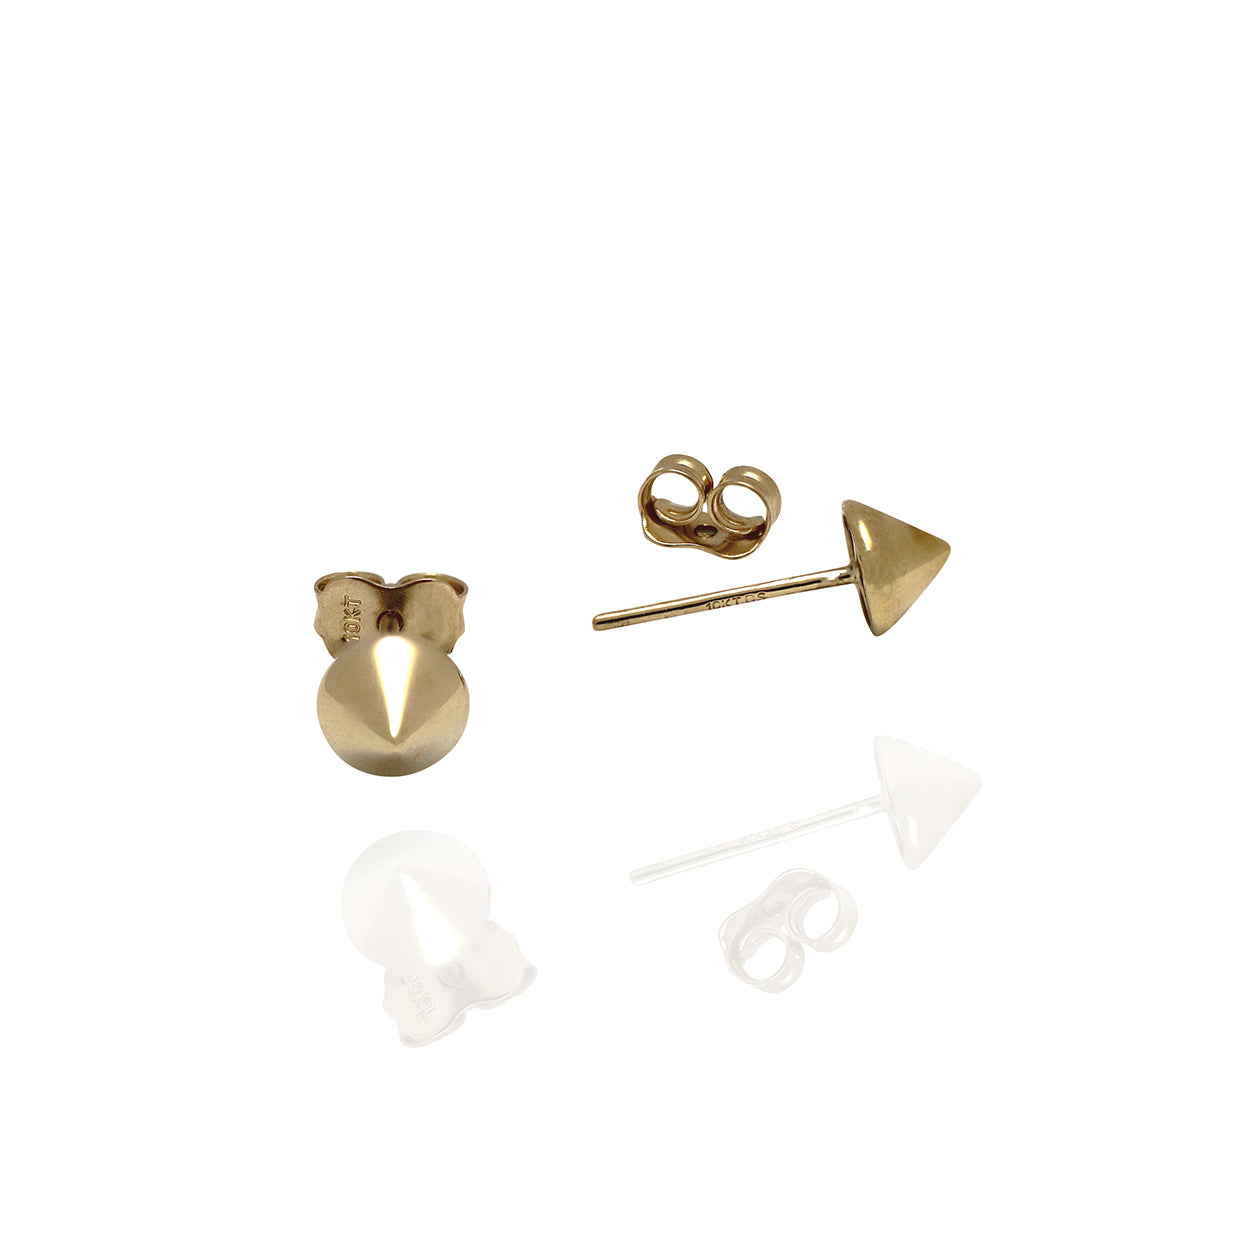 10kt Yellow Gold Cone Style Stud Earrings